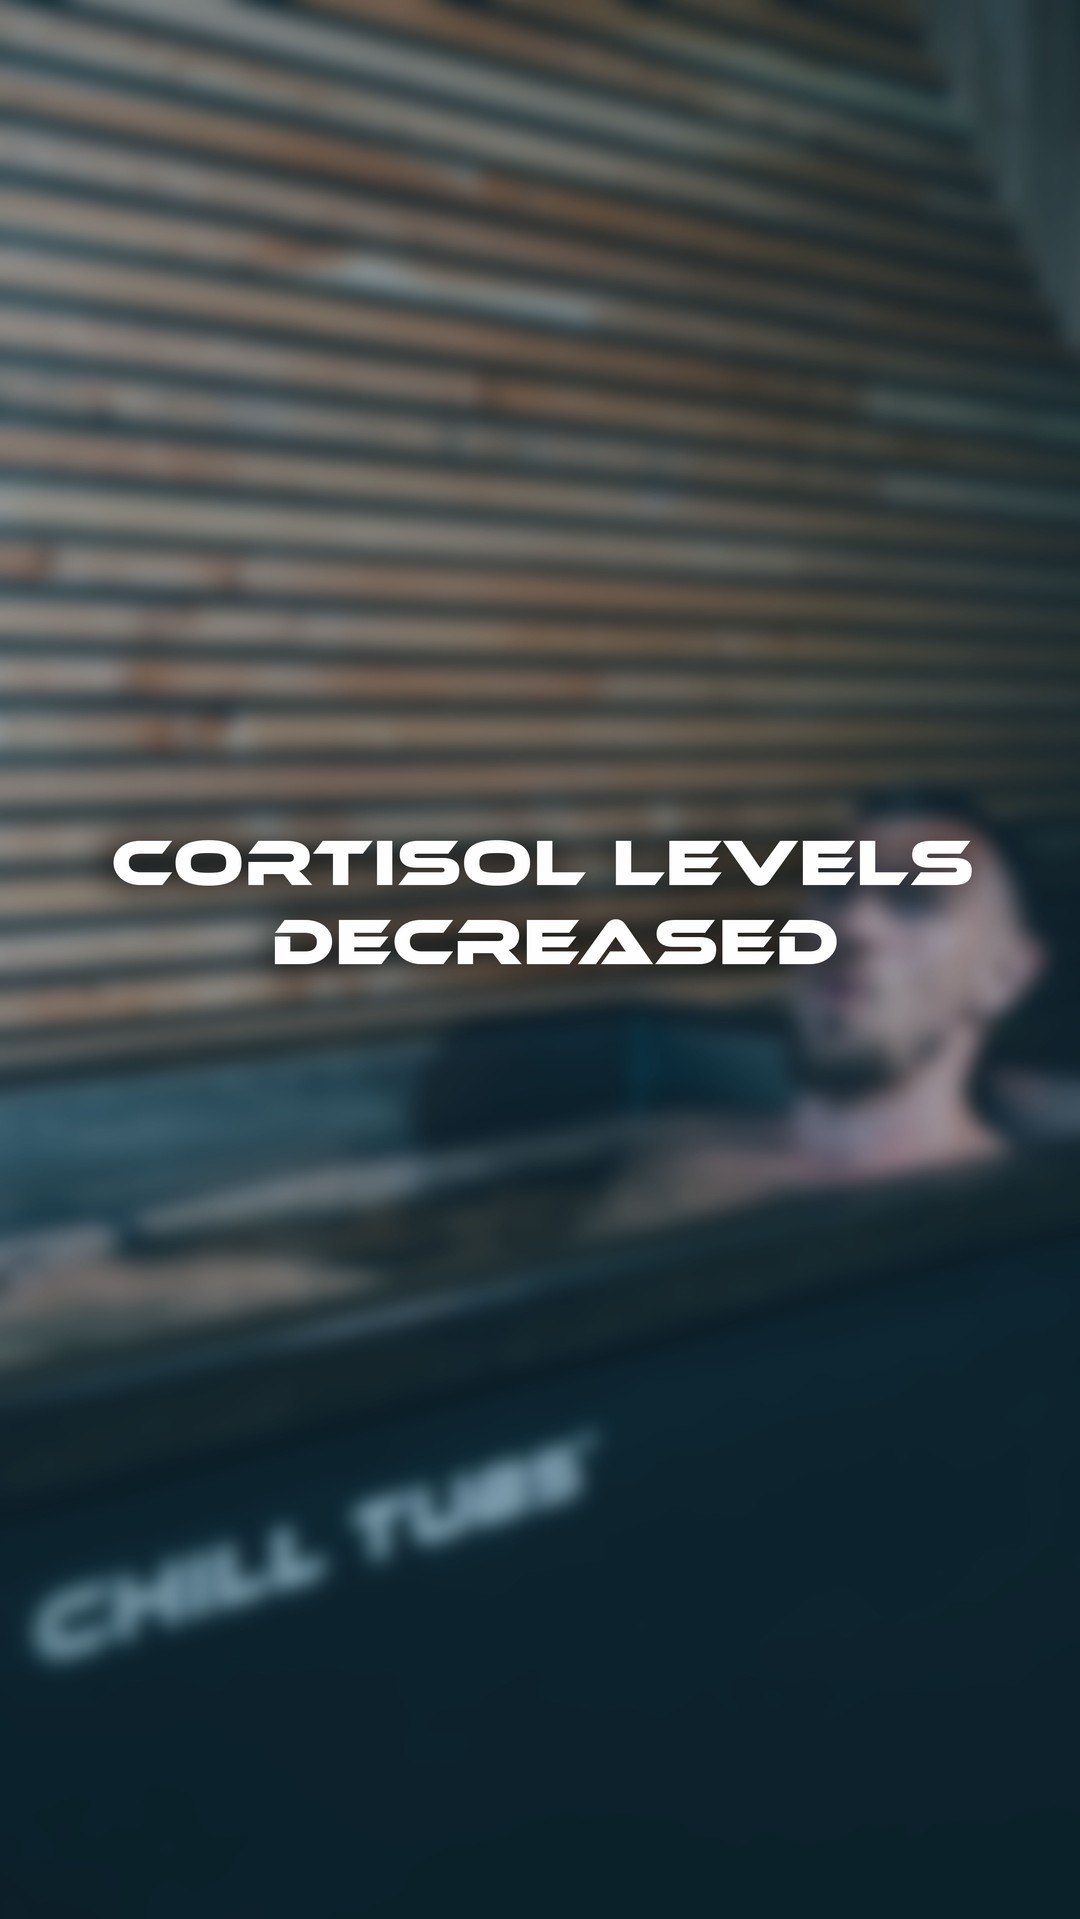 Do you want to know how to decrease your cortisol levels?        During the 30-day Chill Tub study  Rob s cortisol levels decreased by 24.9 .   Head over to our website to find out more. Link in bio        #chilltubs #chilltub #30daychilltubstudy #icebaththerapy #icebathbenefits #icebath #coldwatertherapy #coldwaterimmersion